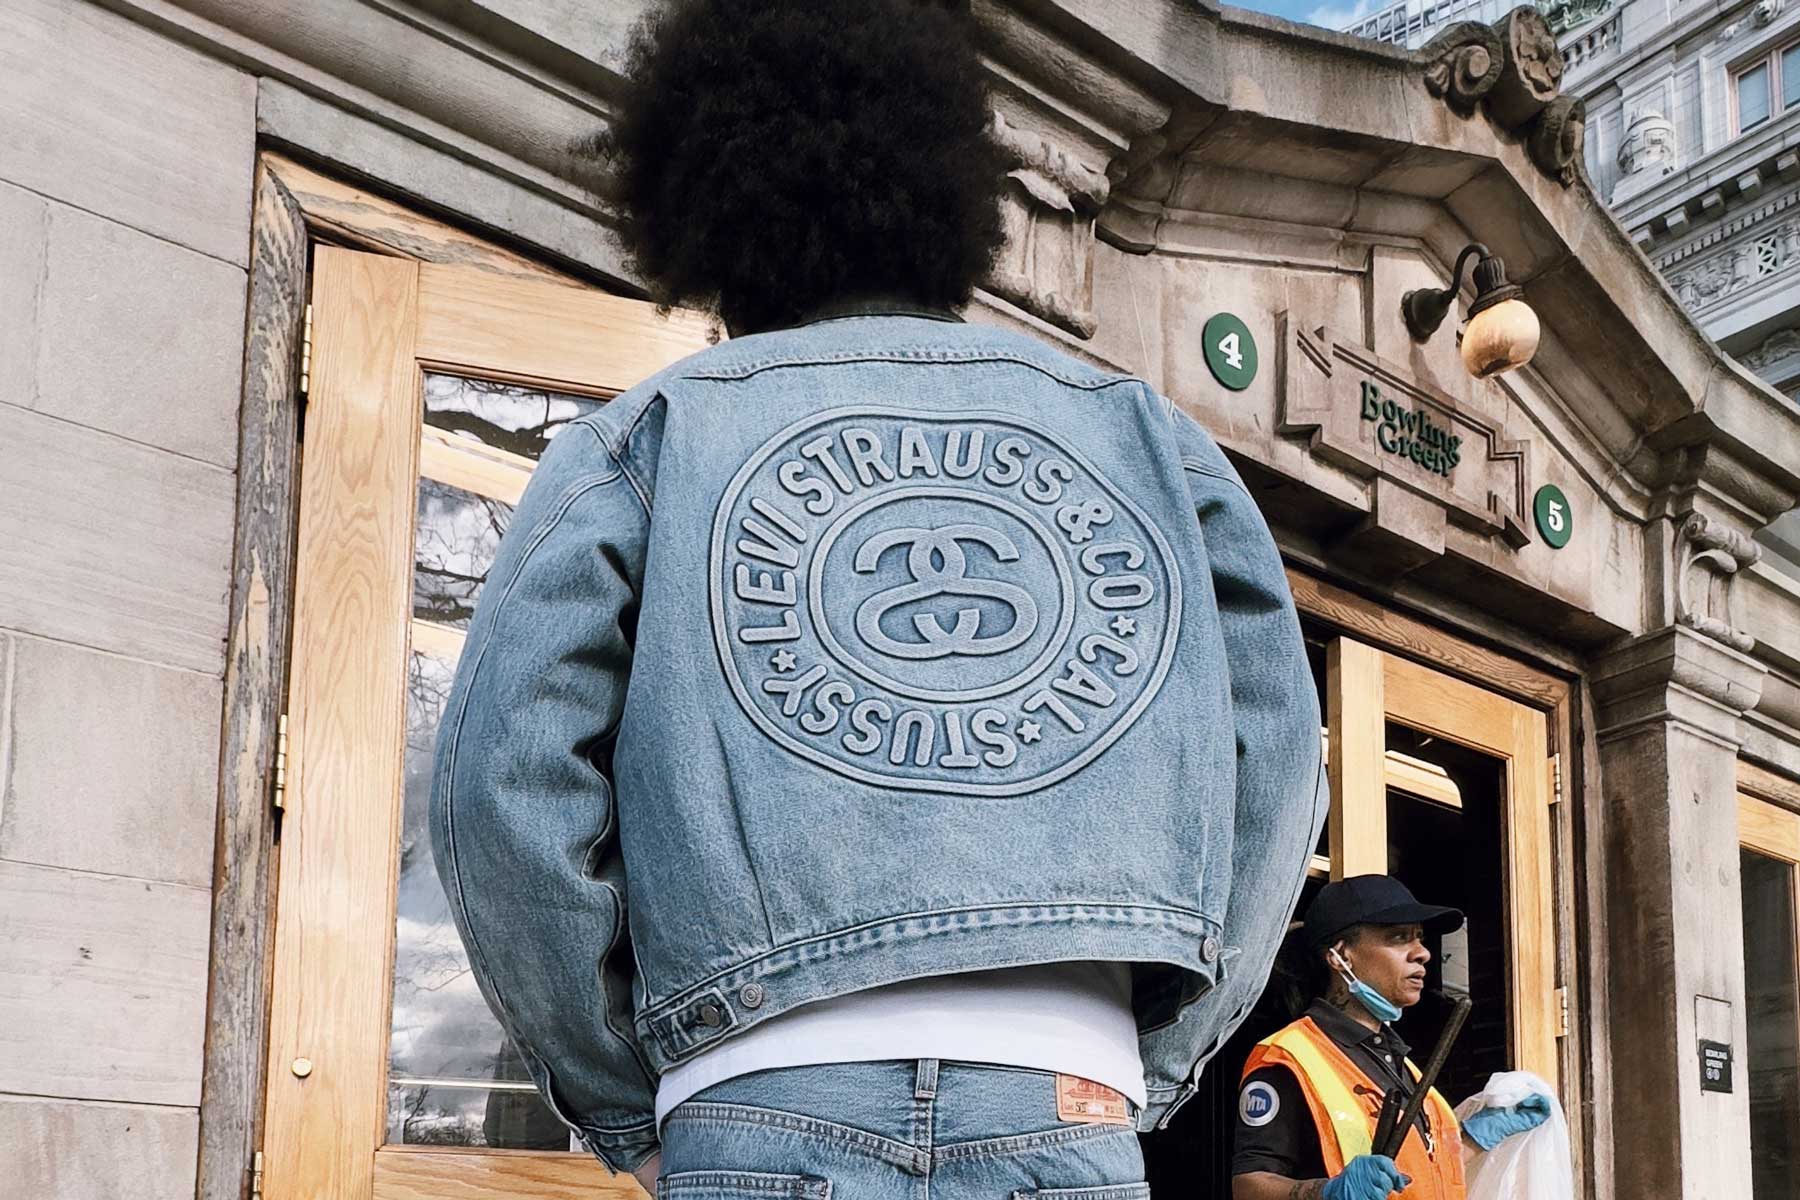 The Latest Levi's Vintage Clothing Trucker is a Mash-Up of Corduroy